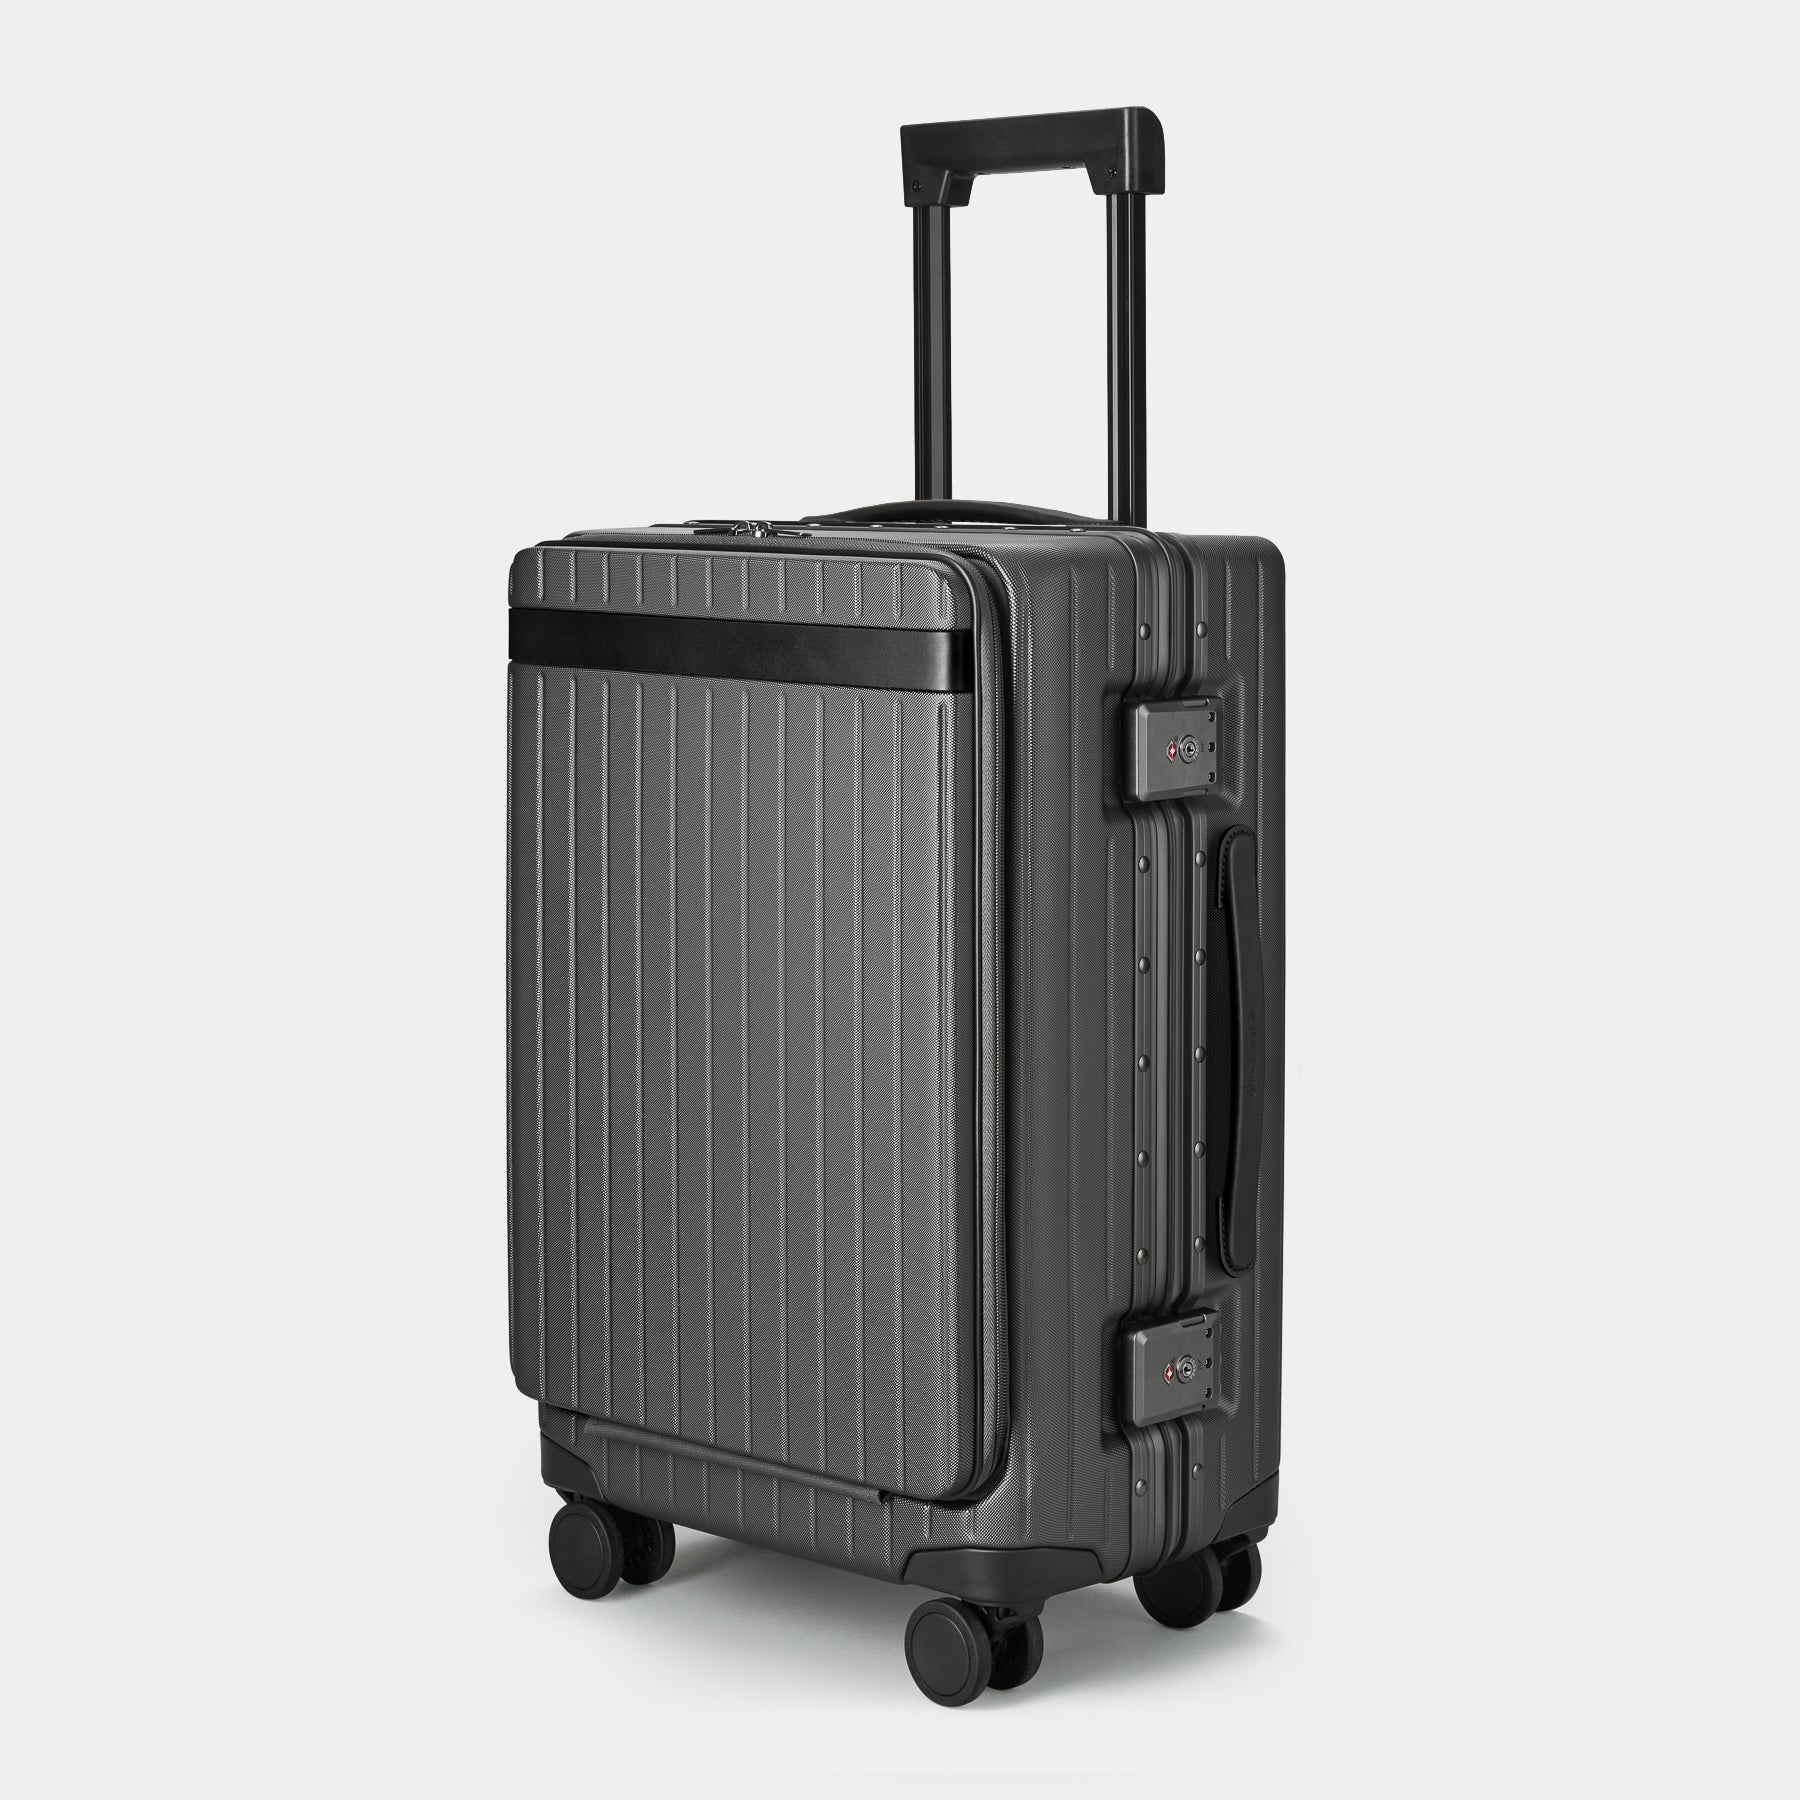 The Carry-on Pro - Return Black Polycarbonate carry-on suitcase - Fair Condition